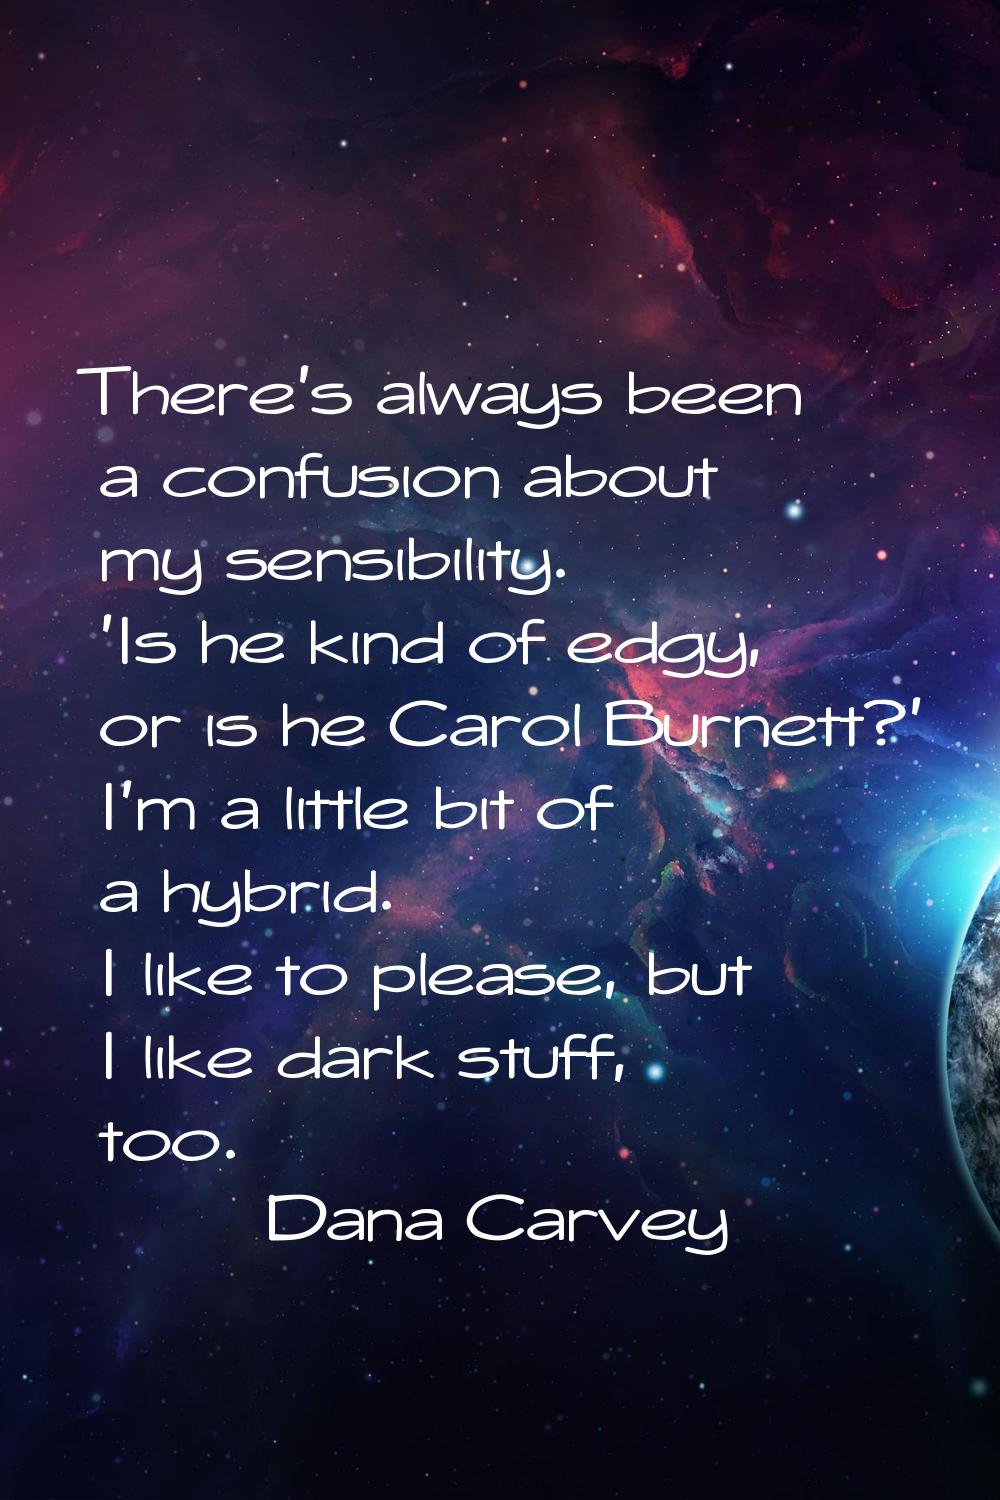 There's always been a confusion about my sensibility. 'Is he kind of edgy, or is he Carol Burnett?'